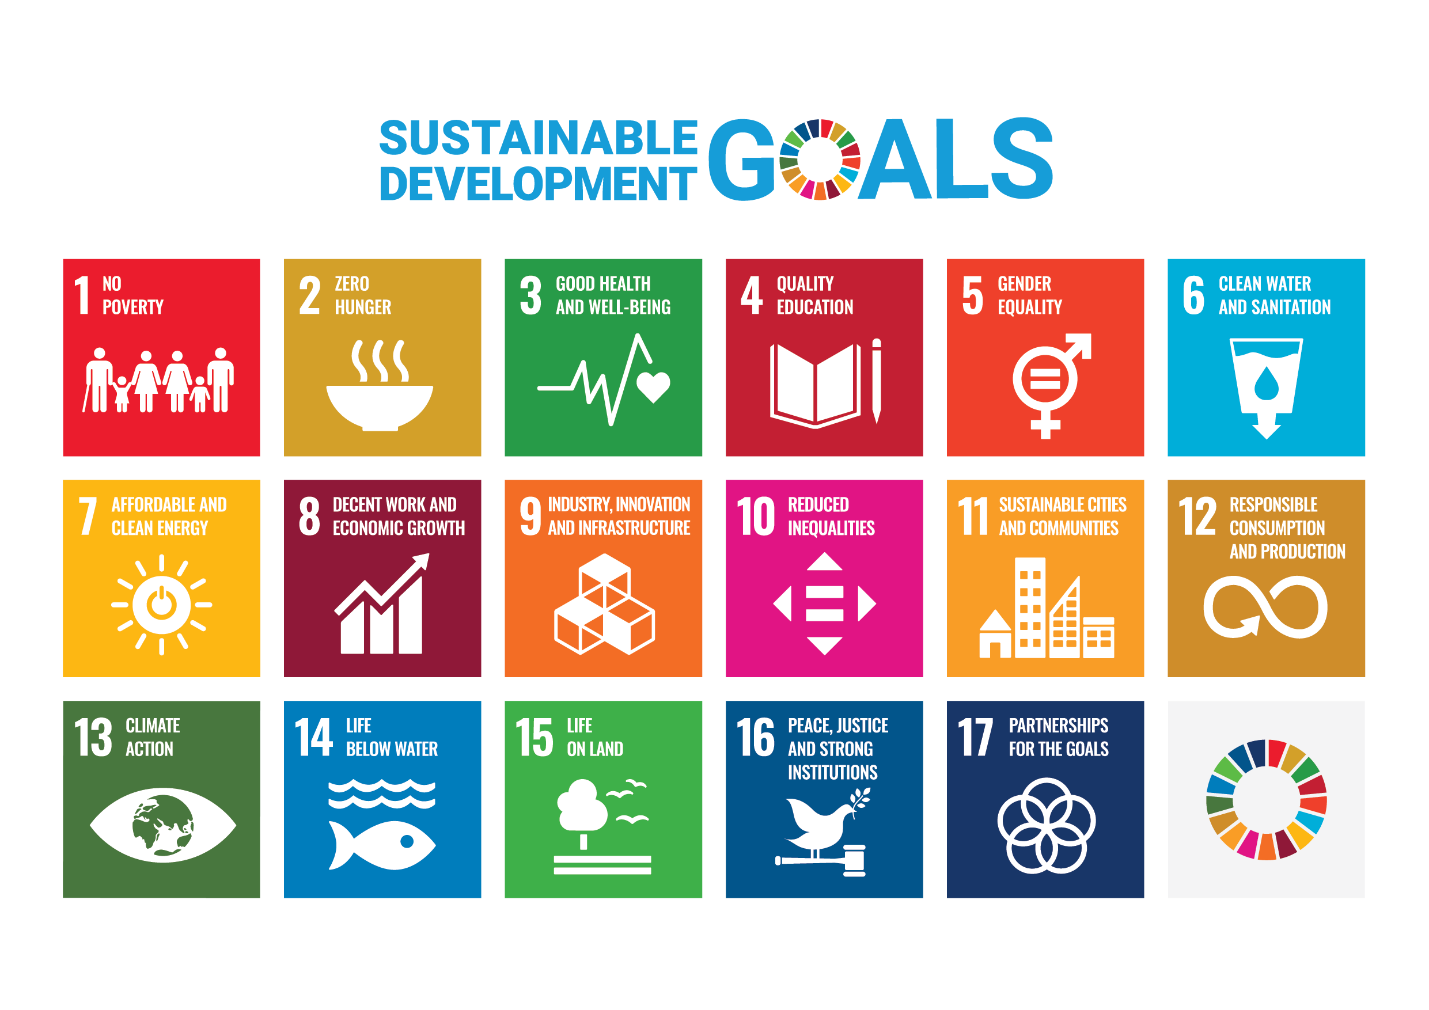 Embracing Sustainability in Travel: How the Travel Industry can Support the UNSDGs- by Sabre